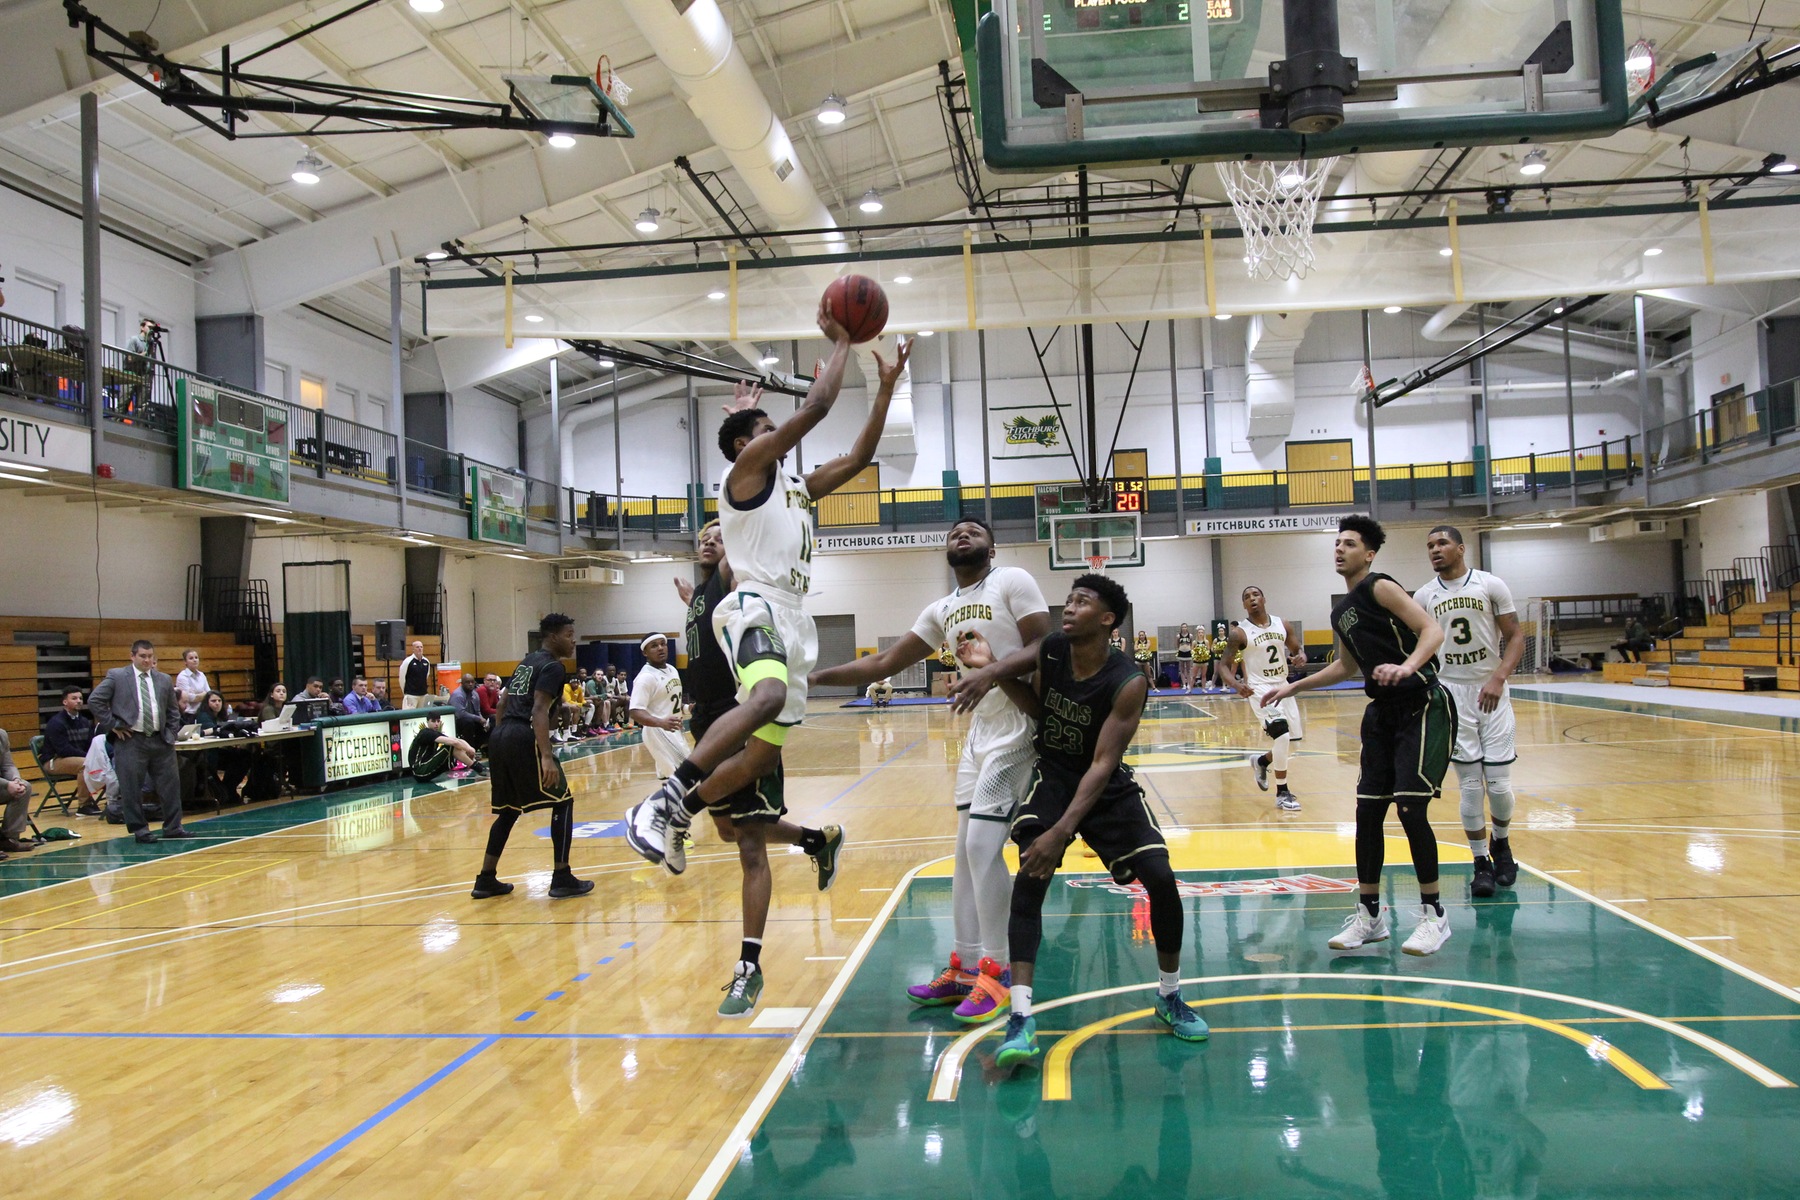 Fitchburg State Grazed by Williams, 68-64